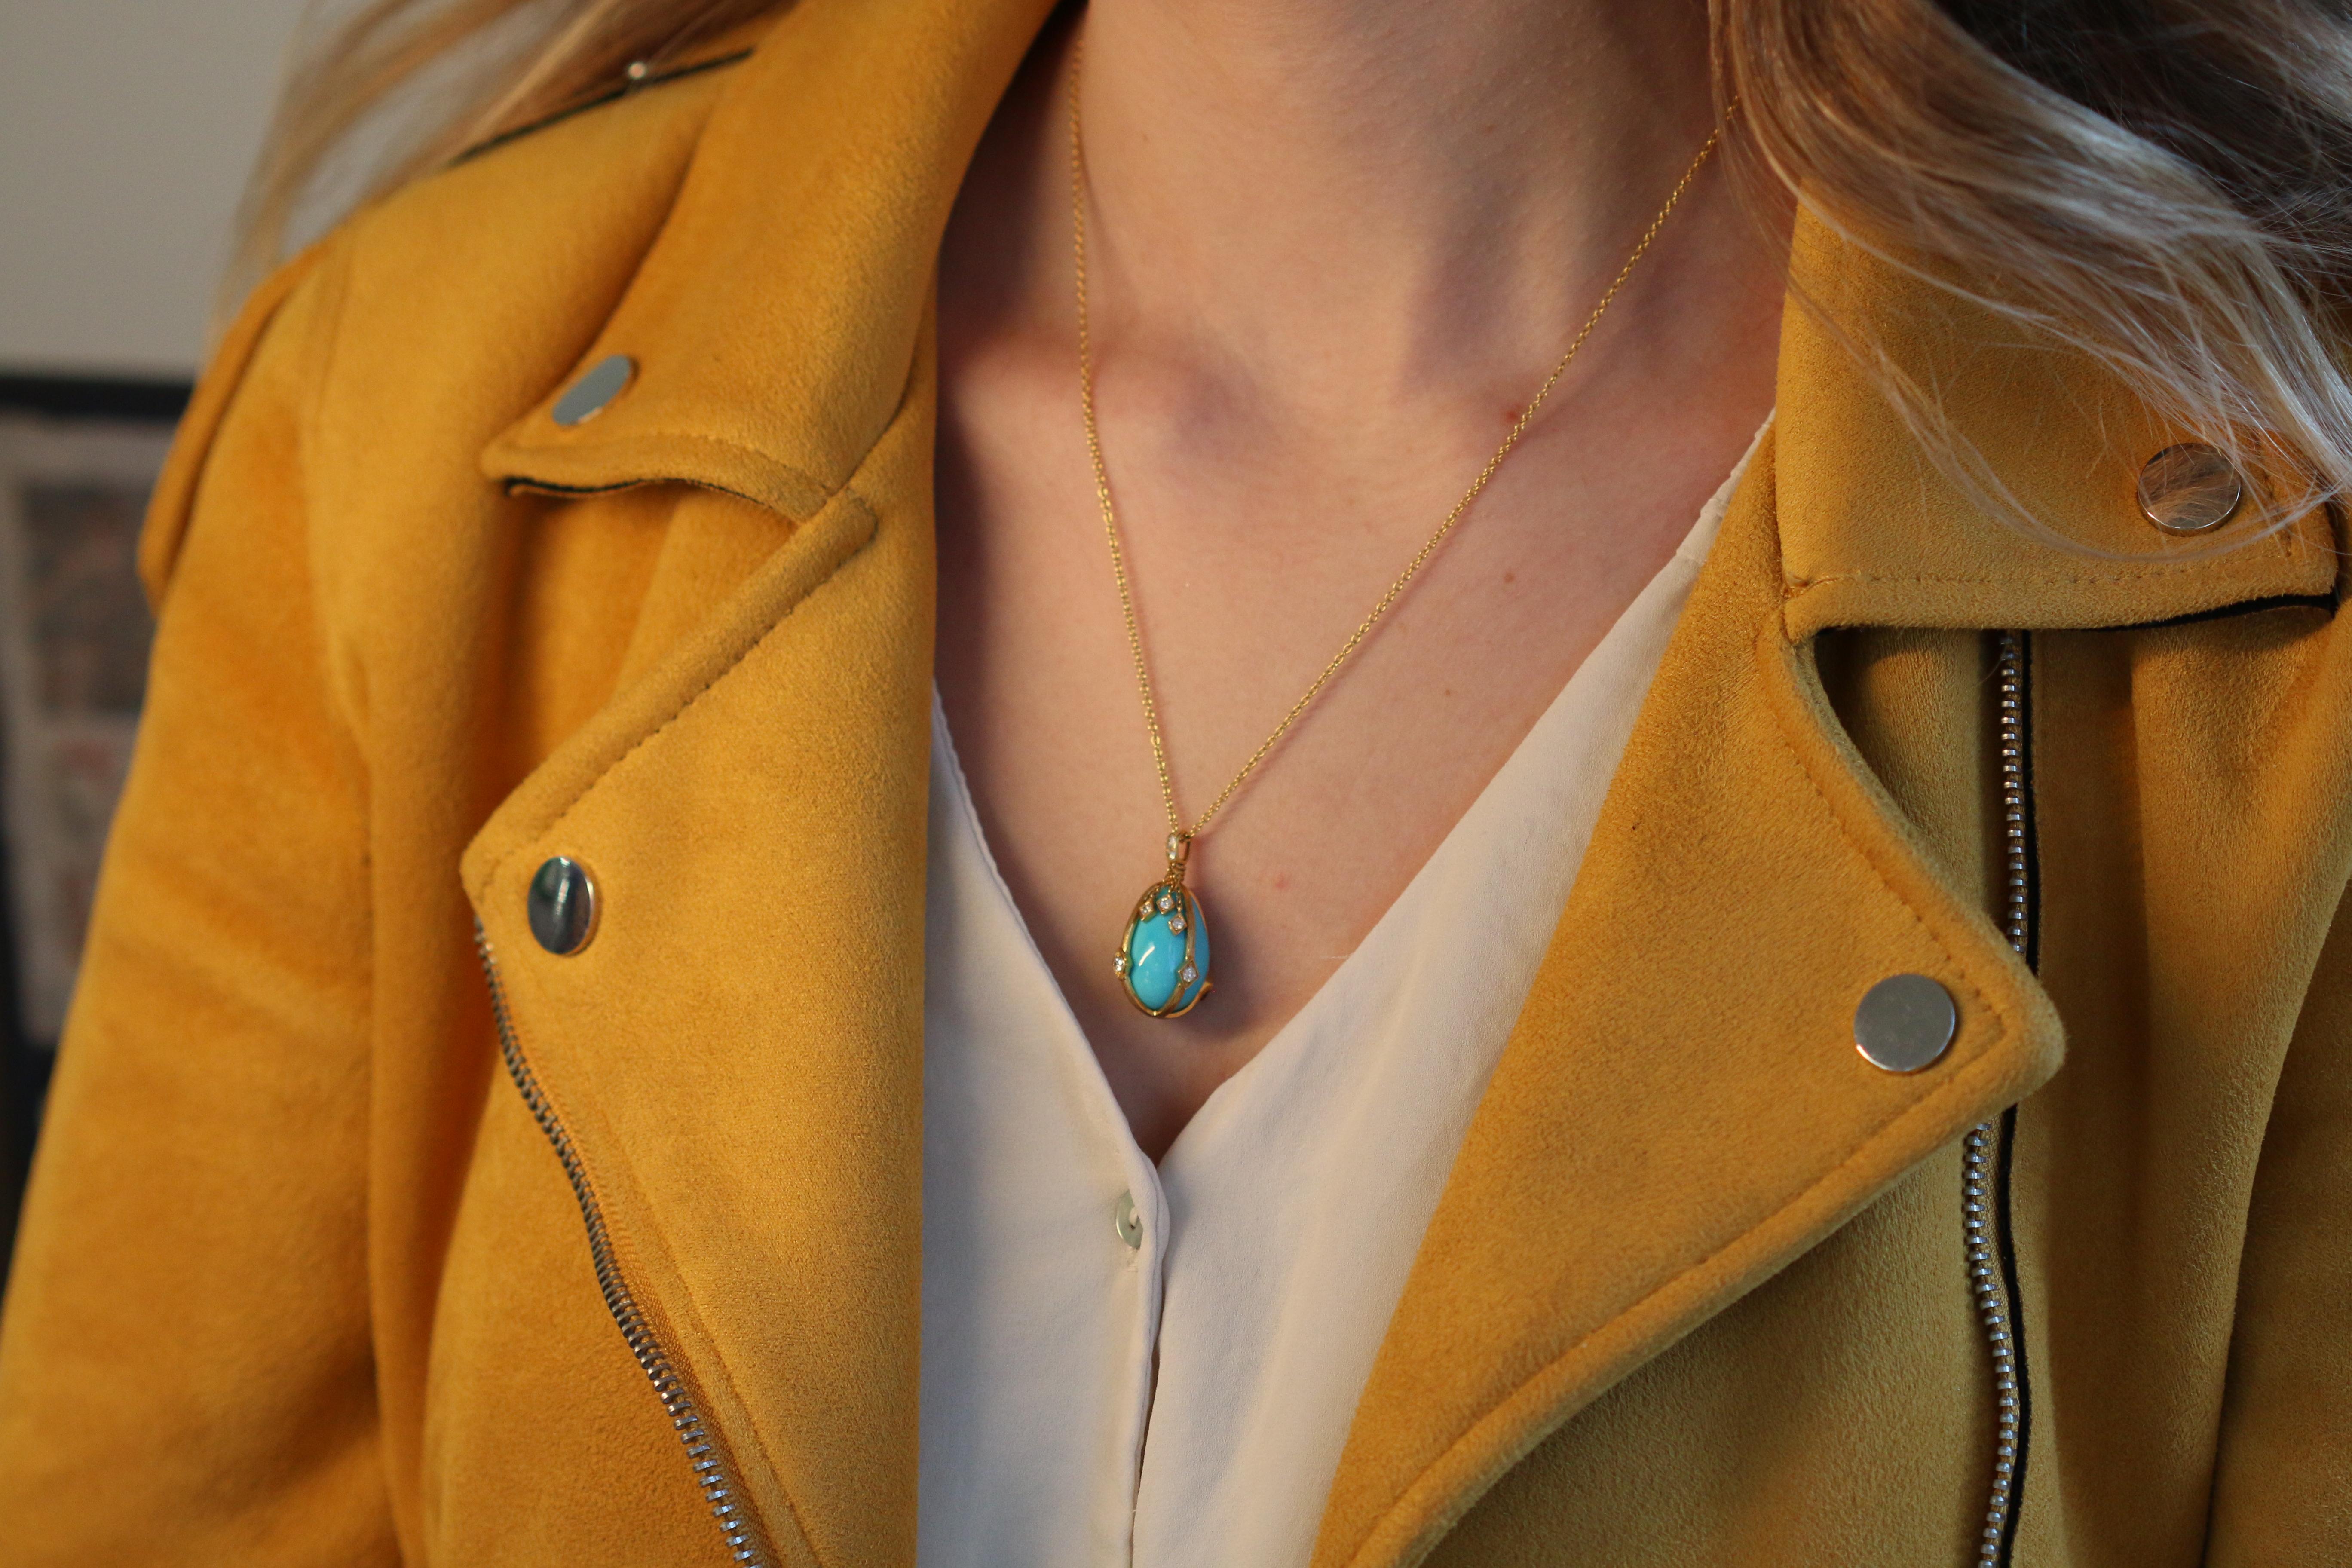 Winning its way into our hearts is this remarkably charming turquoise and diamond 18K yellow gold egg pendant.

A refreshingly coloured blue egg of turquoise sits in a rich cage of 18K yellow gold. The top loop of the pendant is embellished with